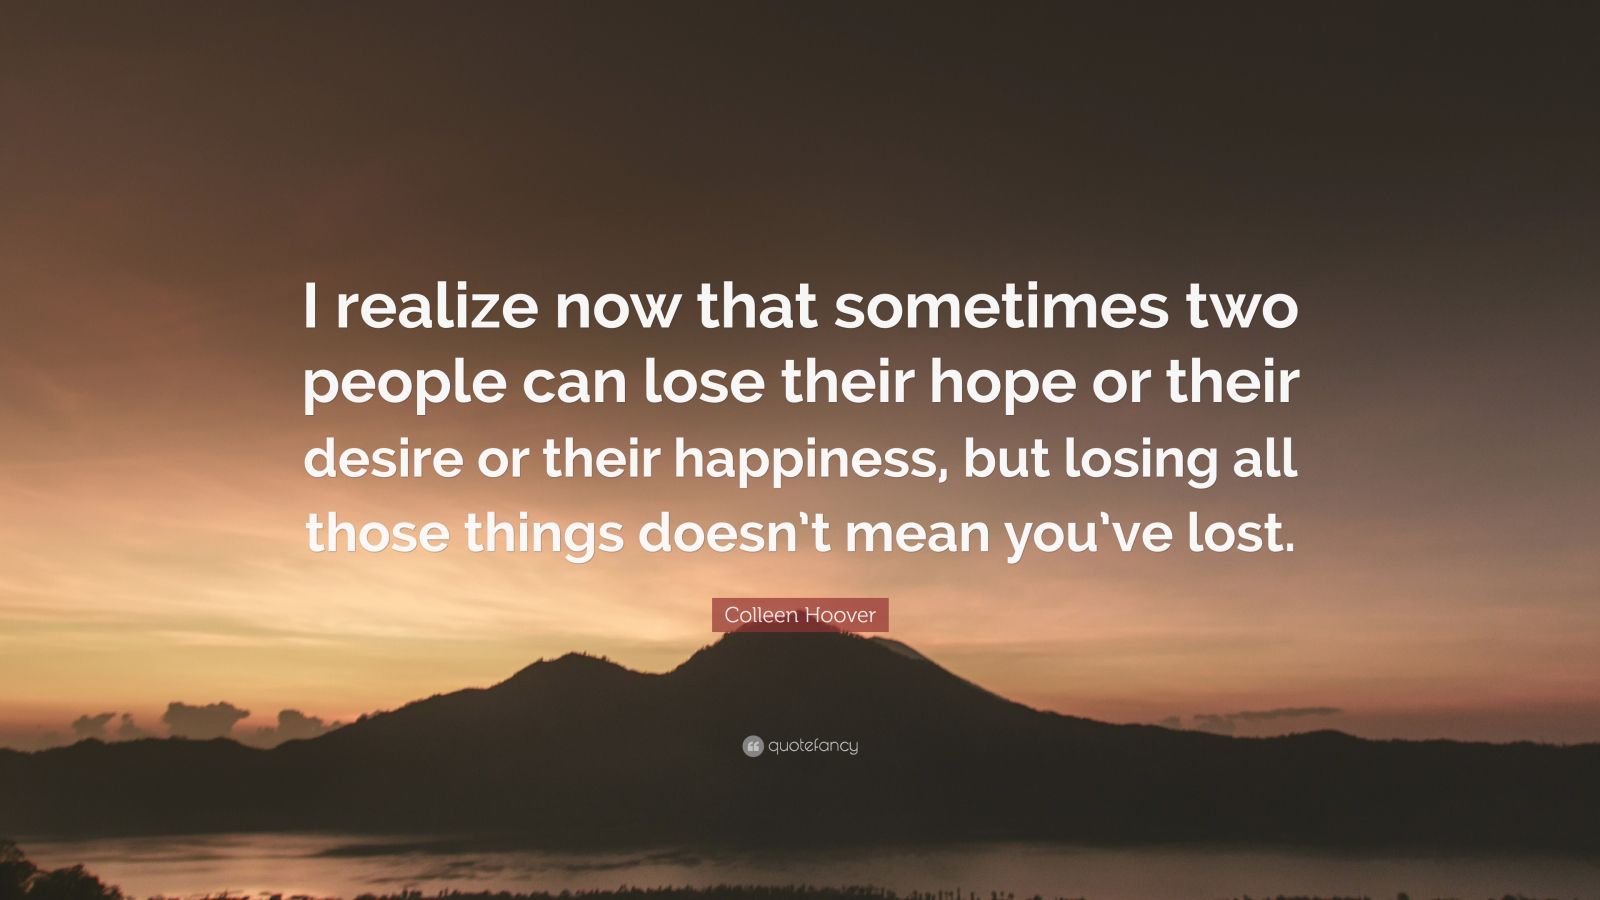 Colleen Hoover Quote: “I realize now that sometimes two people can lose ...